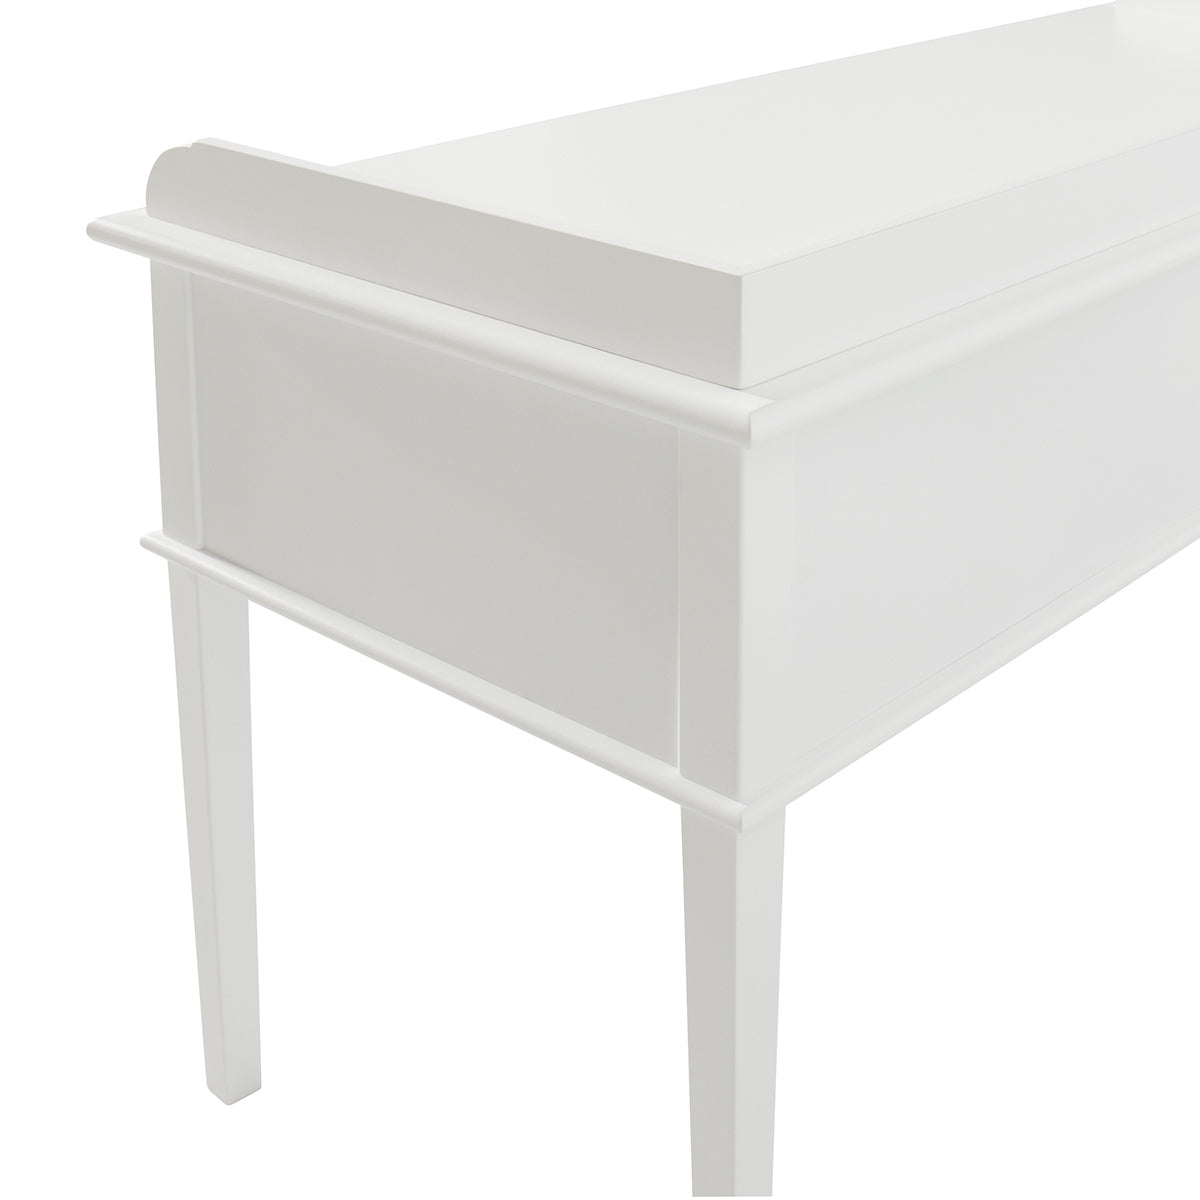 Additional Legs | Junior Office Table | 021016